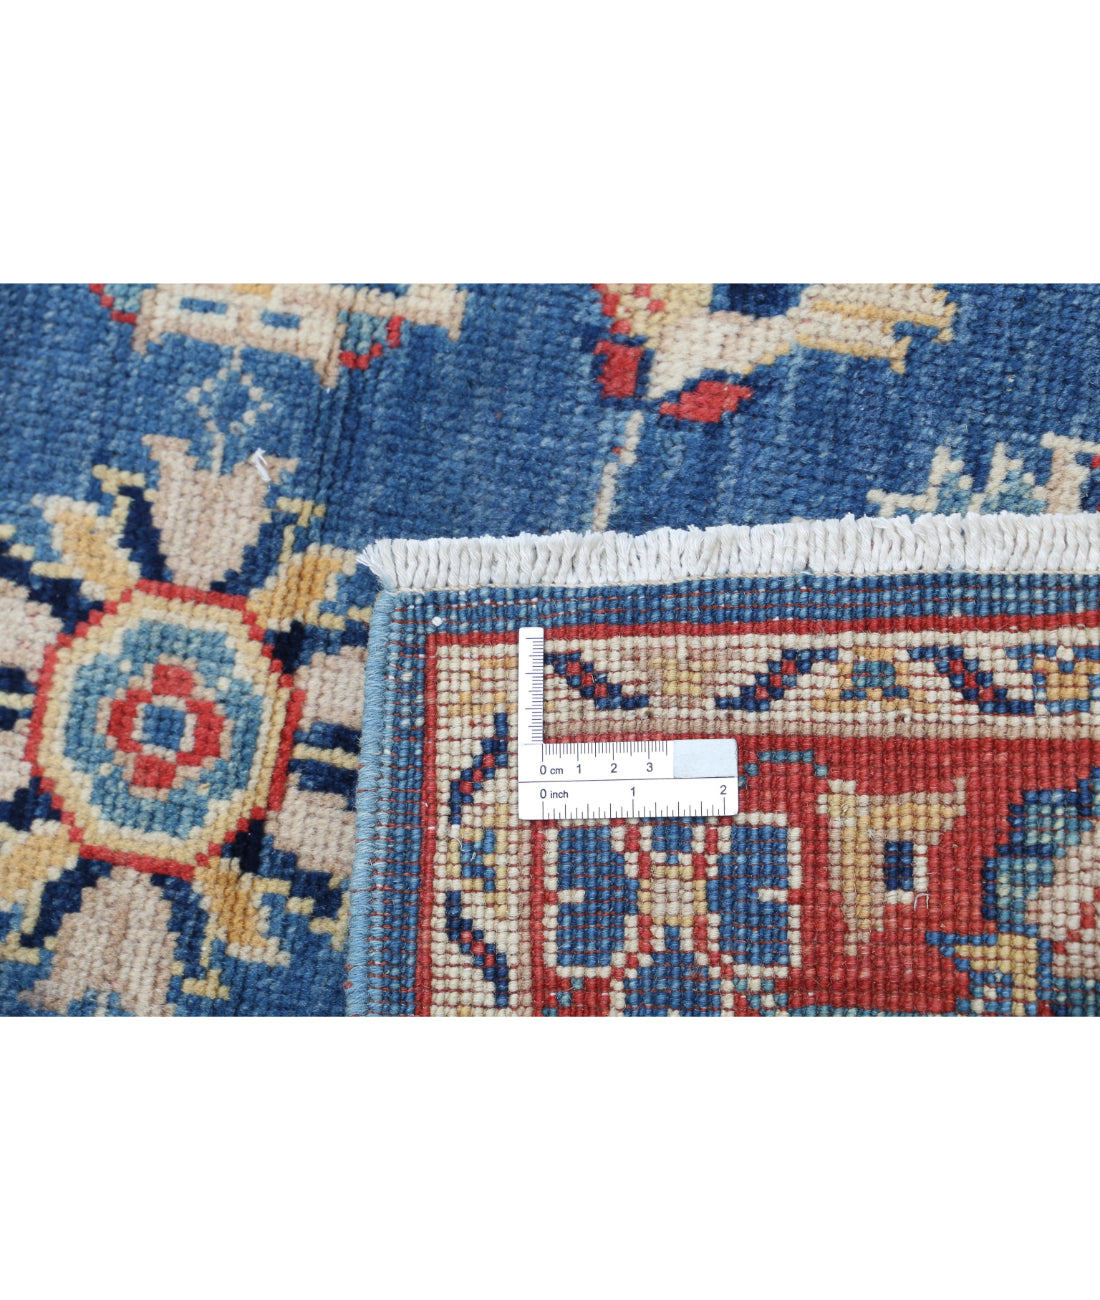 Ziegler 2'8'' X 4'0'' Hand-Knotted Wool Rug 2'8'' x 4'0'' (80 X 120) / Blue / Red